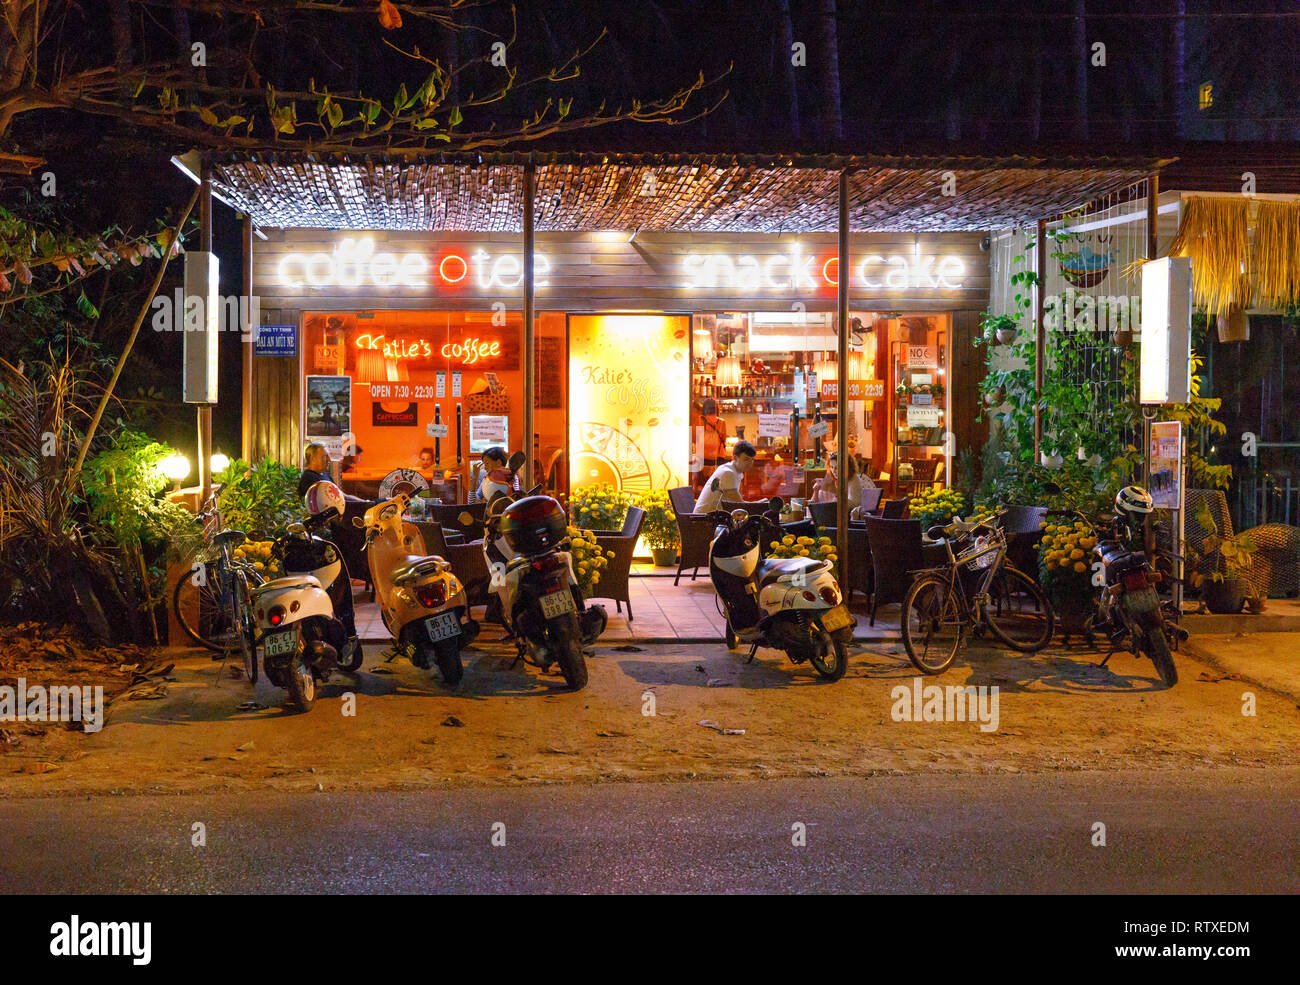 NAM TIEN, VIETNAM - FEBRUARY 15, 2018: Scooters and motor bikes in front of cafe at night in Nam Tien, Vietnam on February 15, 2018 Stock Photo